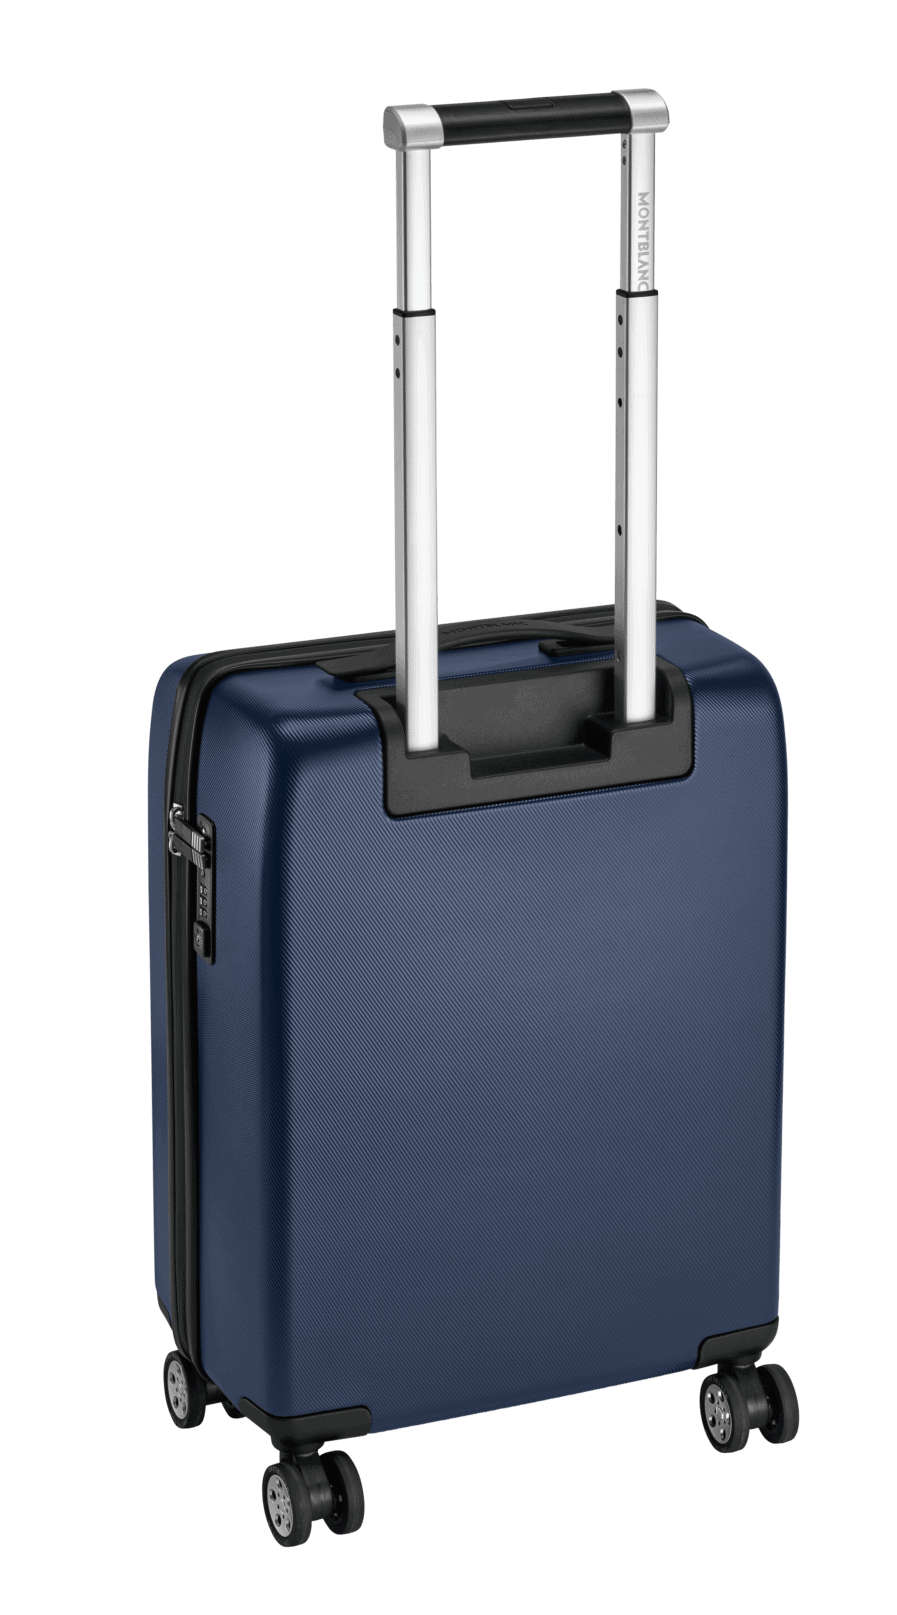 Valise compact 4 roues bleue